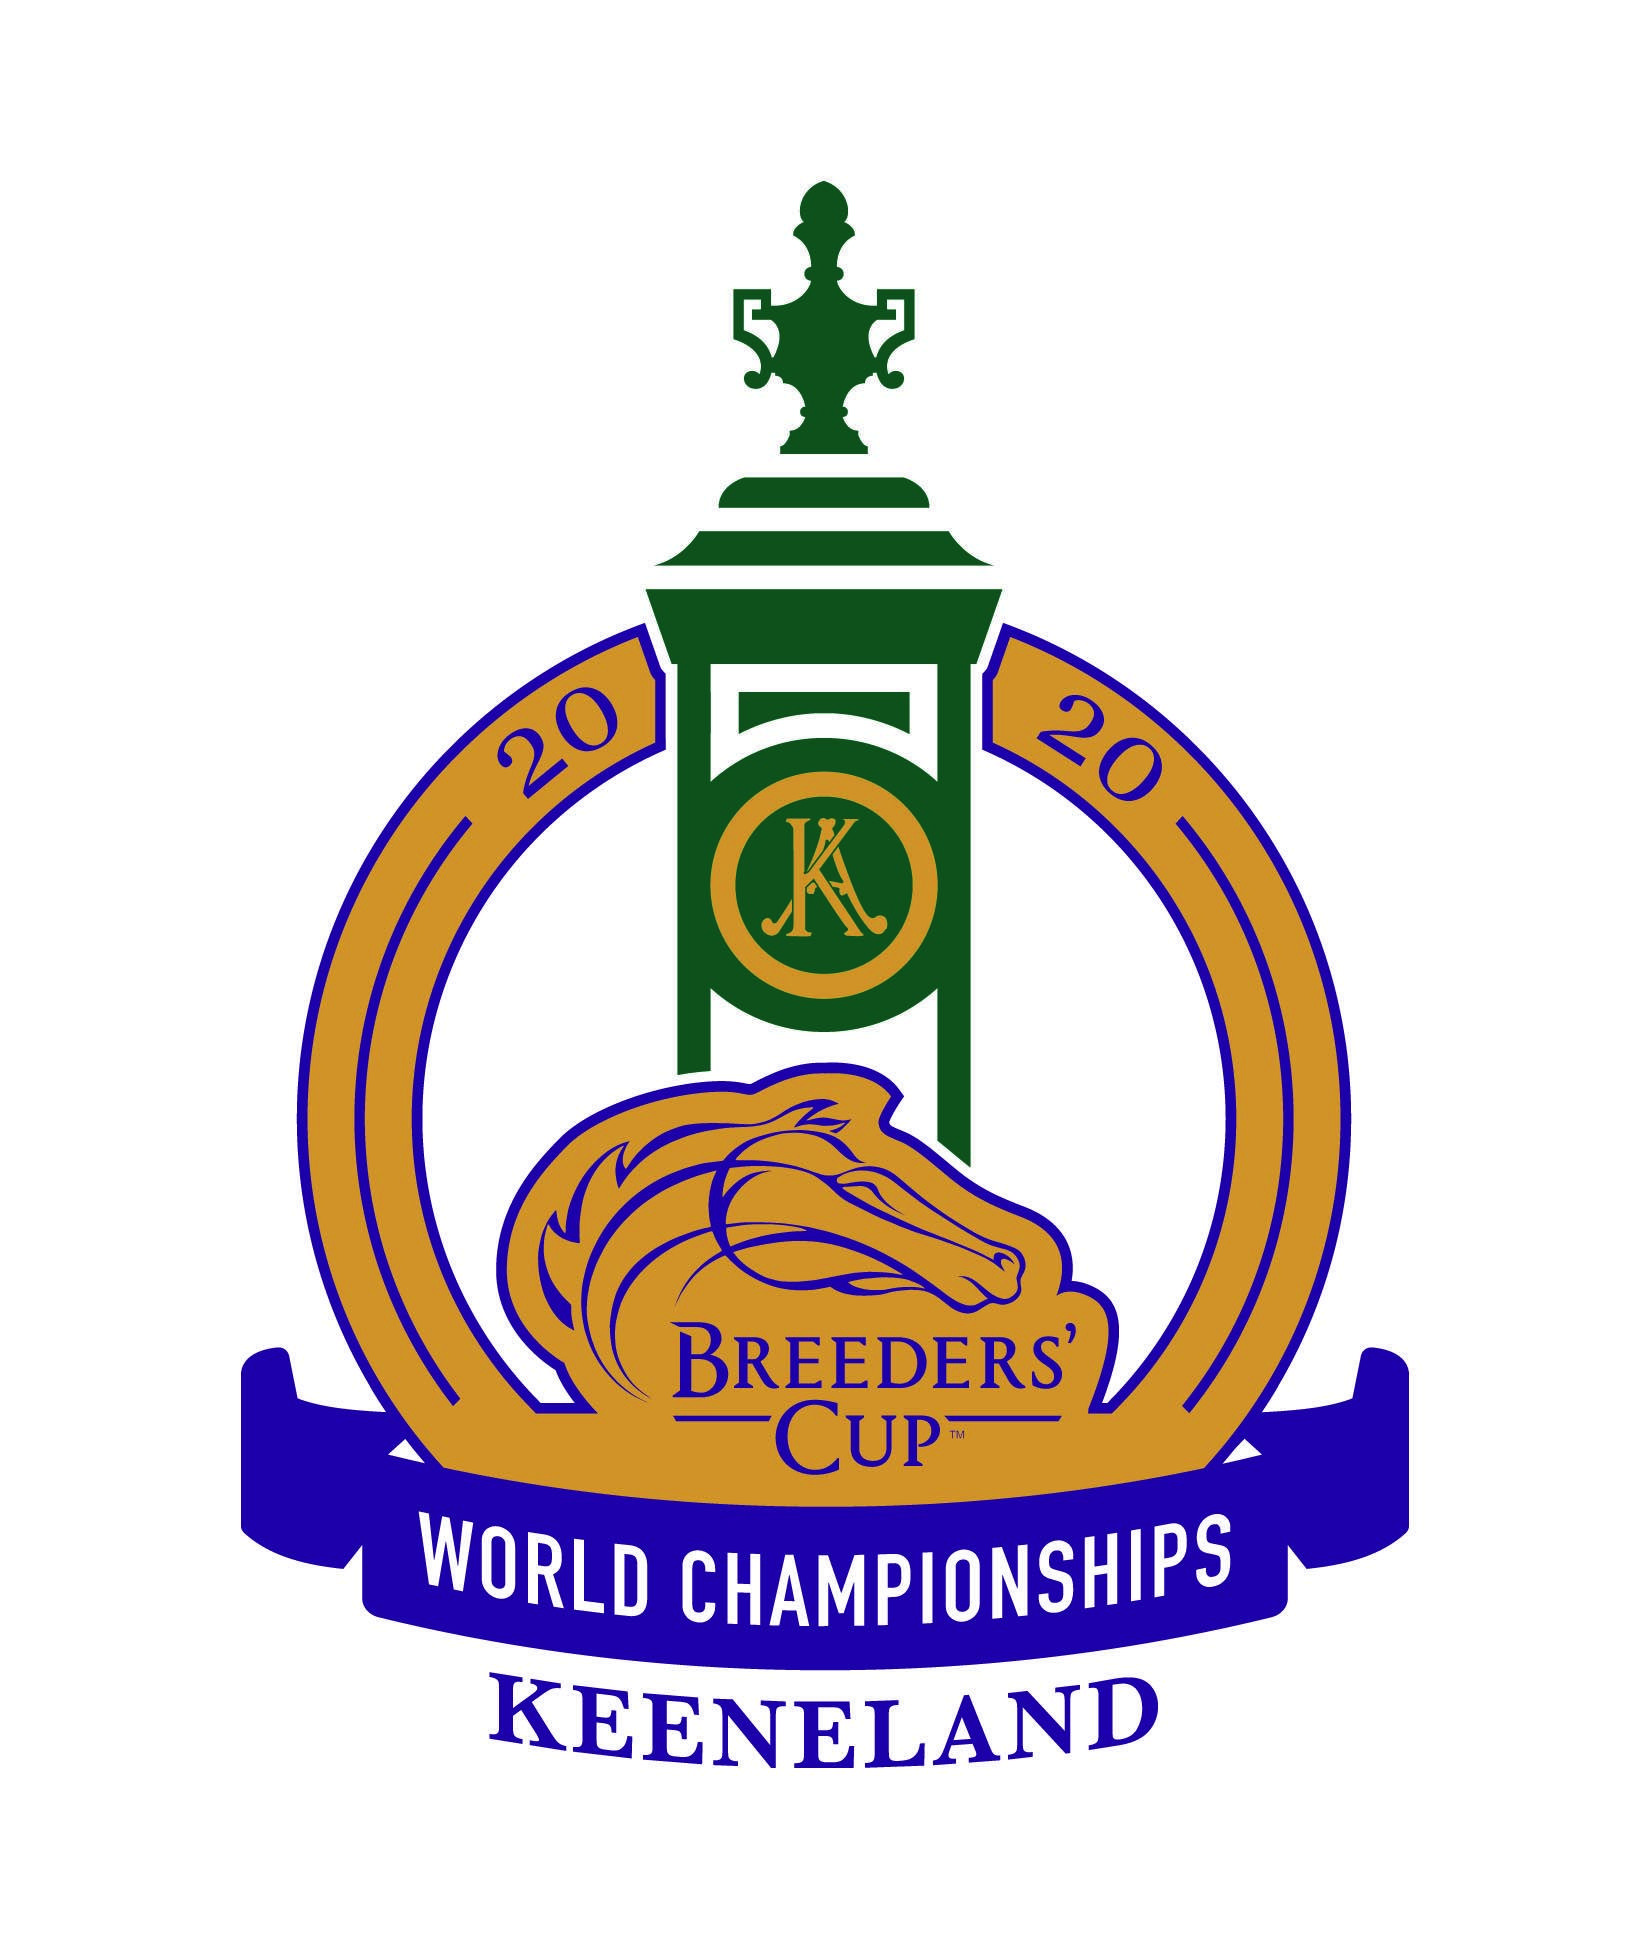 Keeneland Logo - Breeders' Cup Debuts Official Logo for 2020 Breeders' Cup World